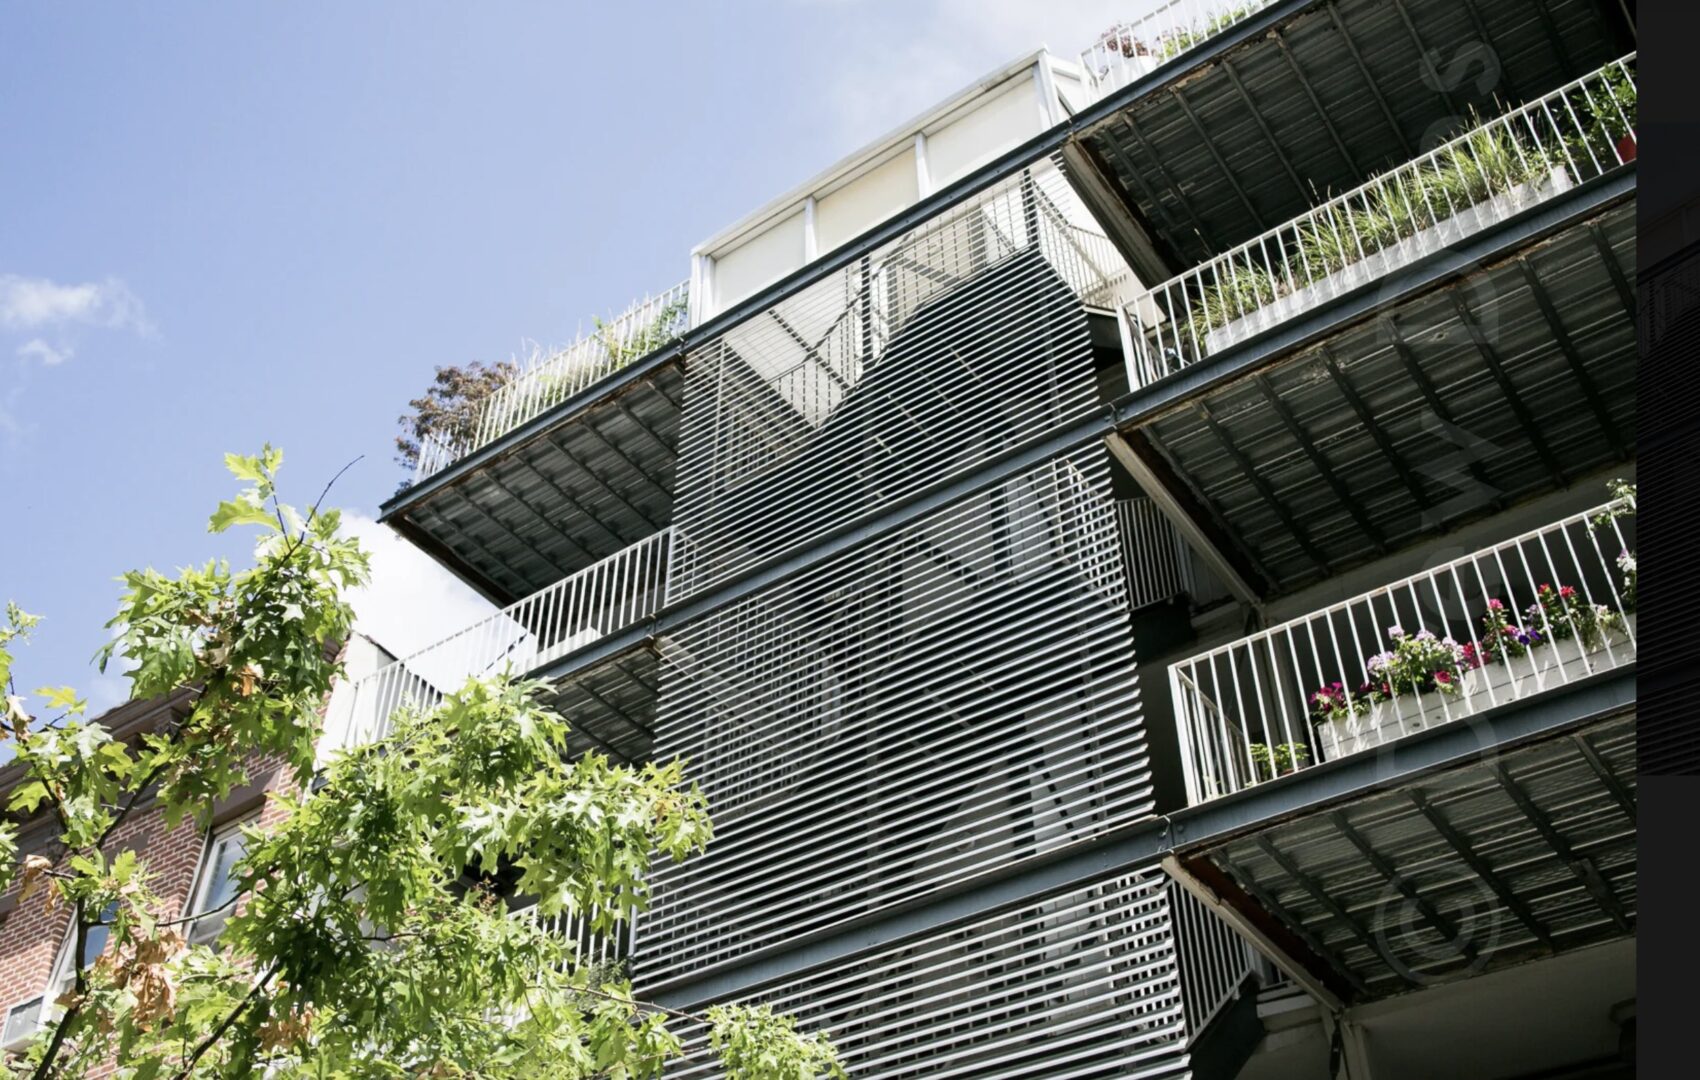 An apartment building with balconies and plants.